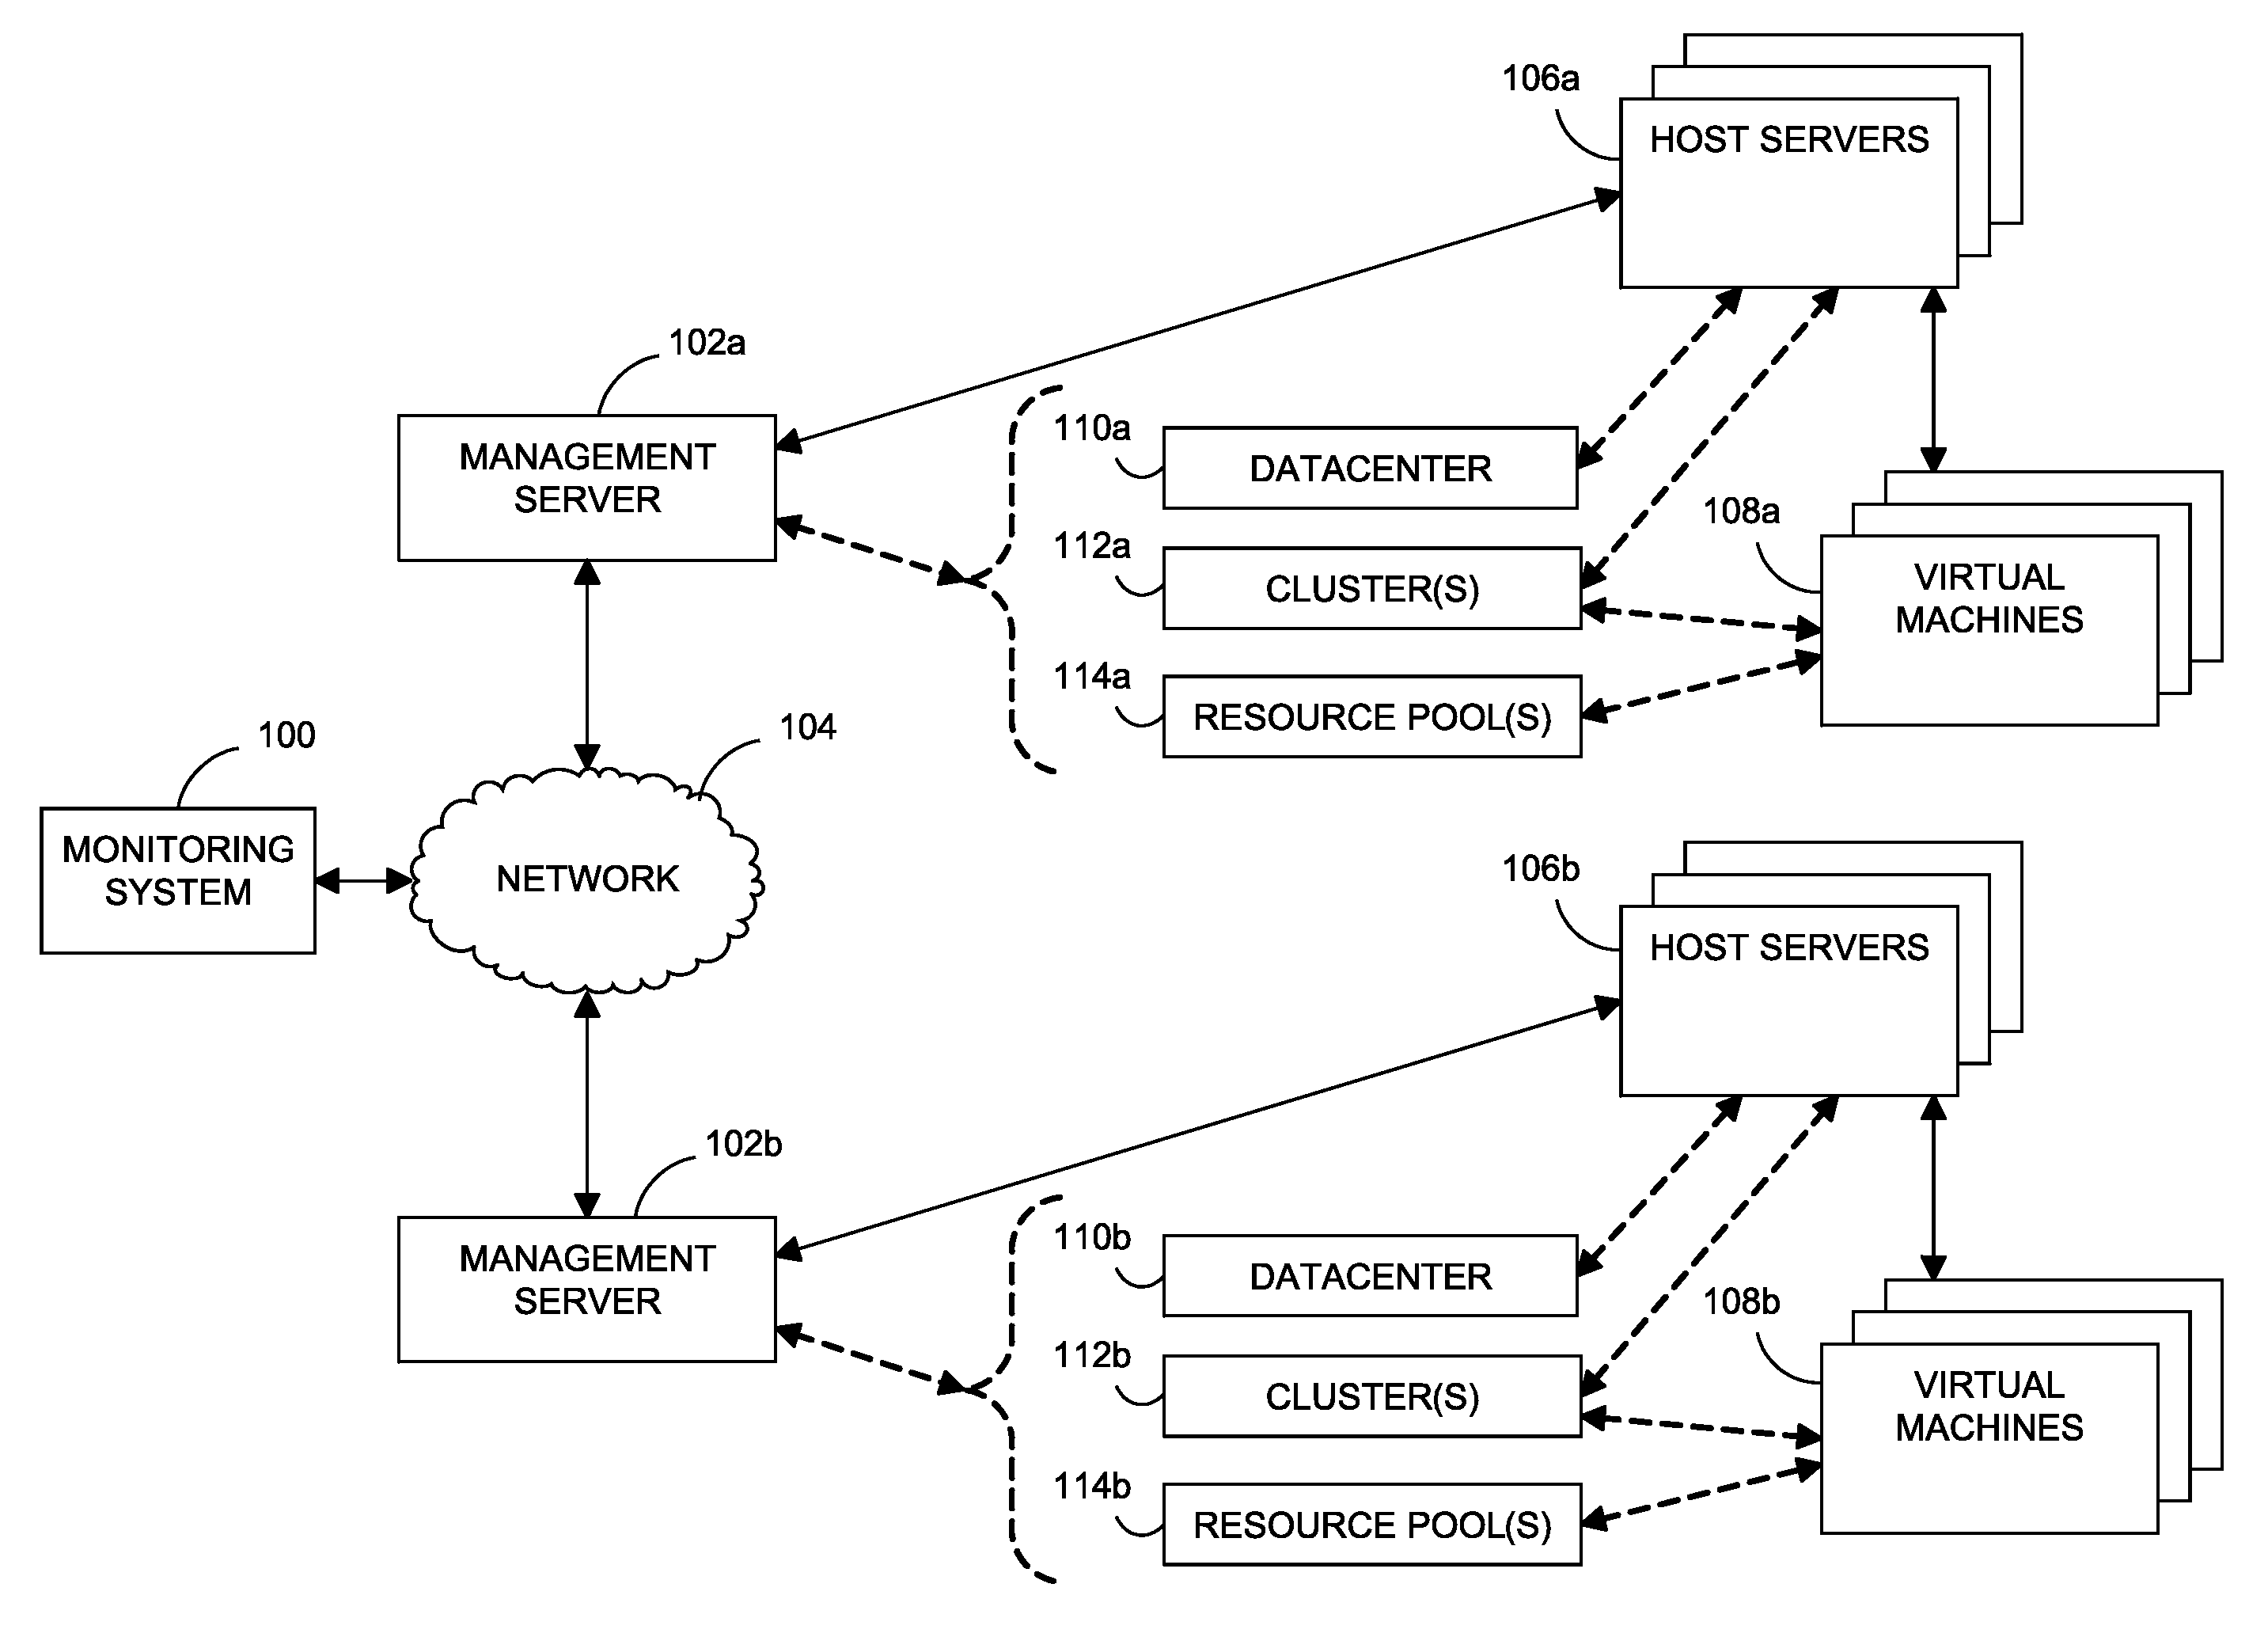 Systems and methods for analyzing performance of virtual environments